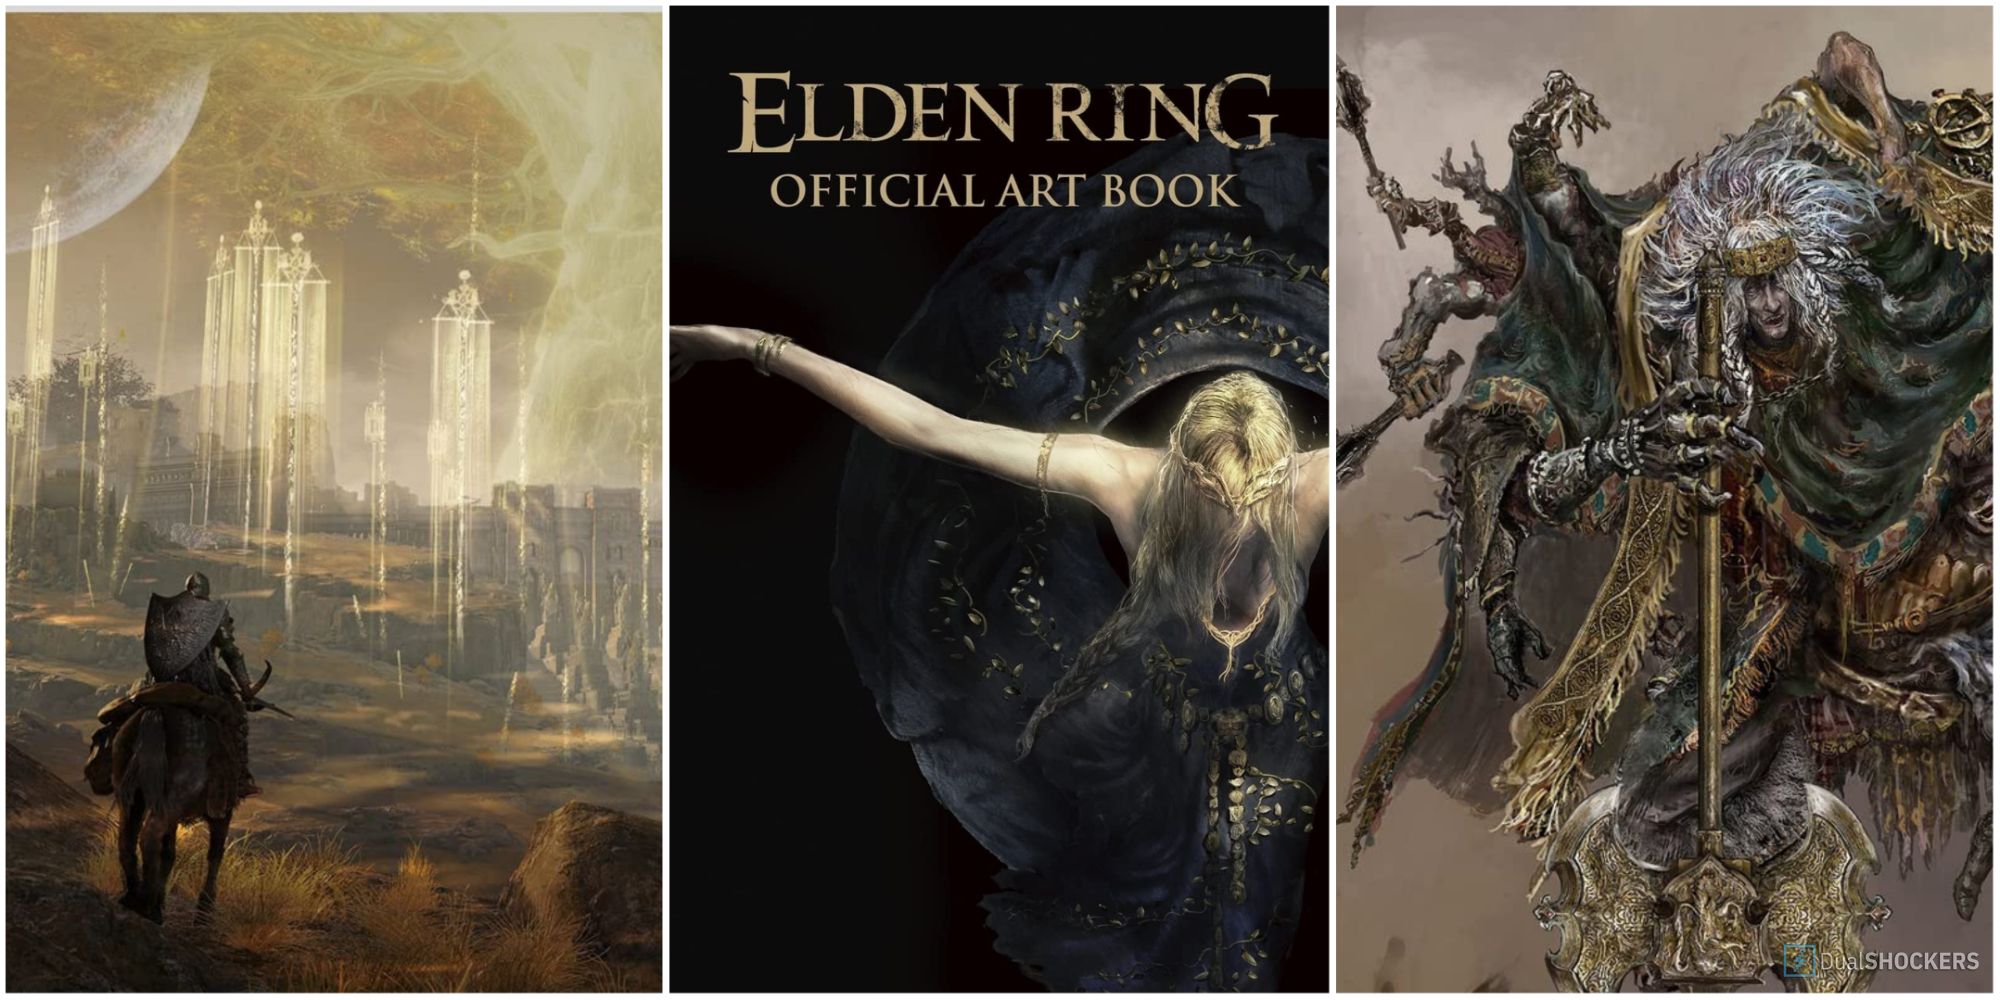 UDON To Publish Elden Ring Art Books In English